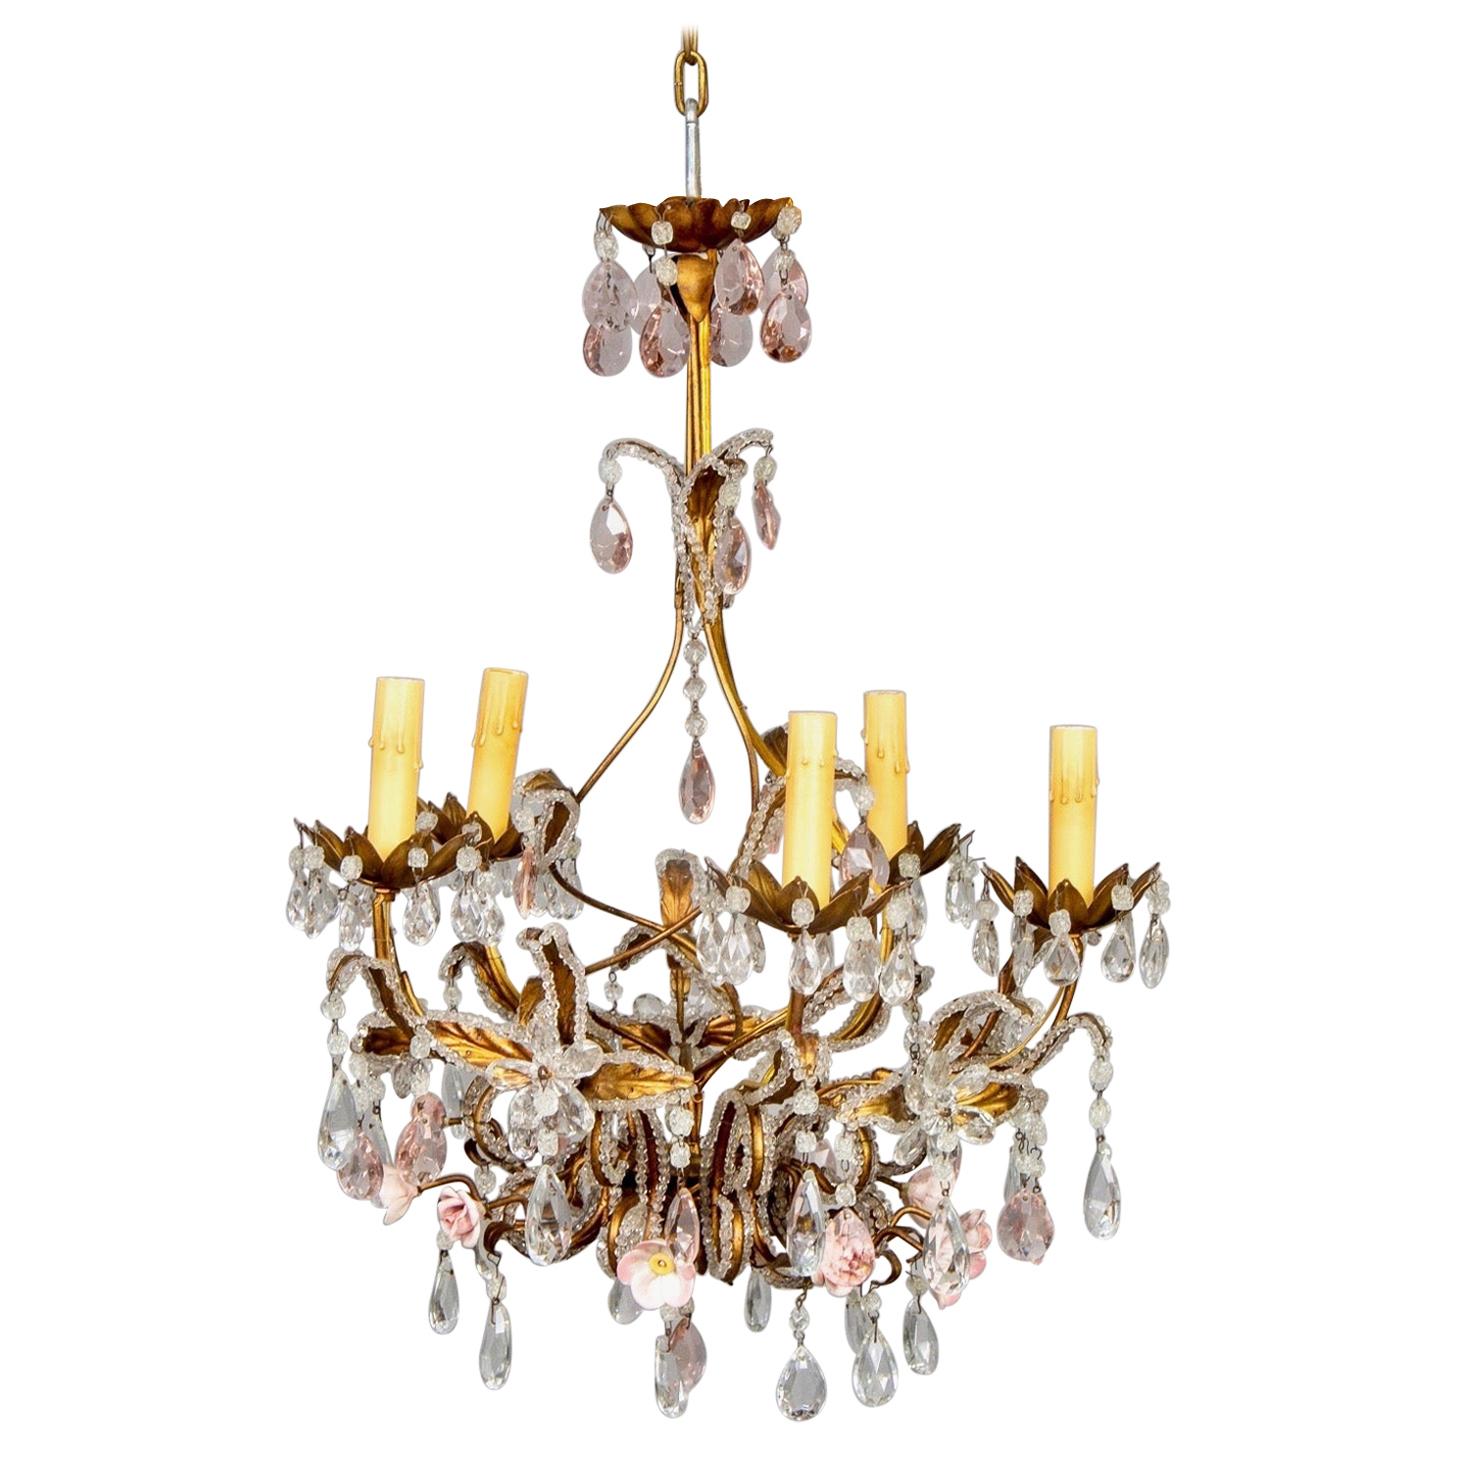 French Five-Light Gilt Metal and Crystal Chandelier with Porcelain Roses